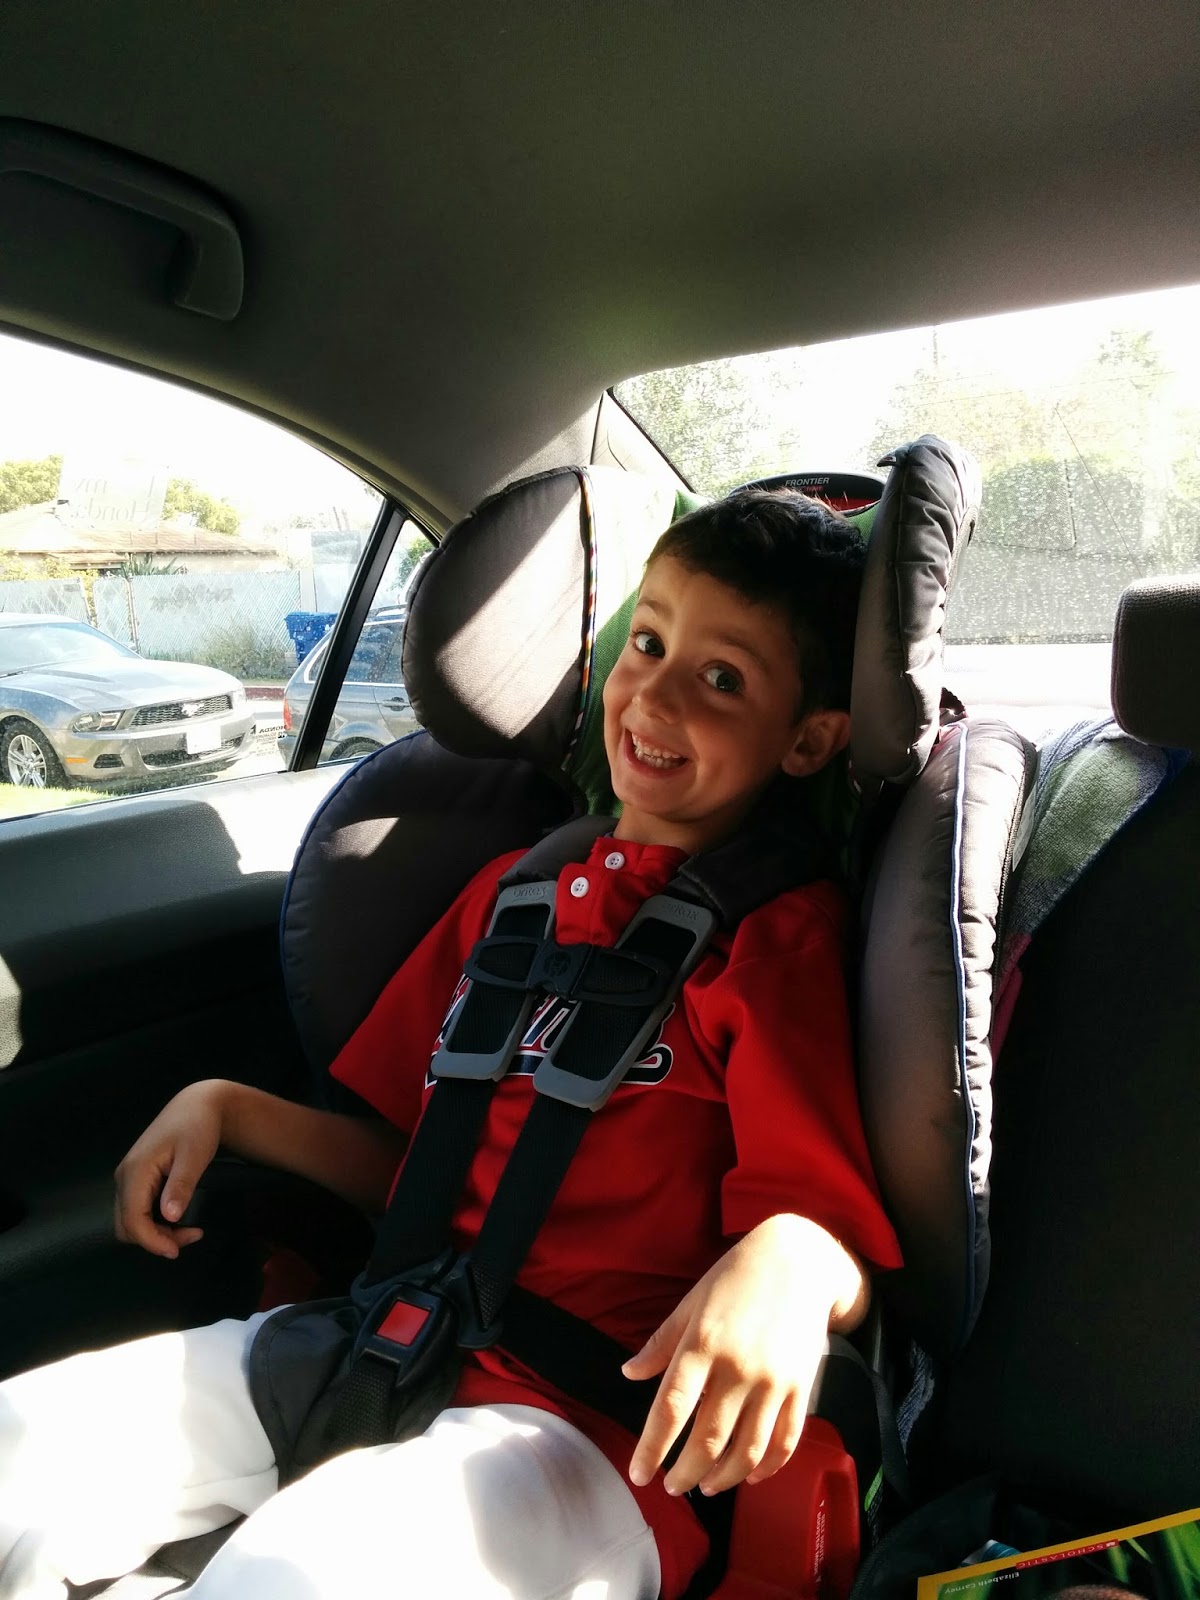 car seat for 7 year old